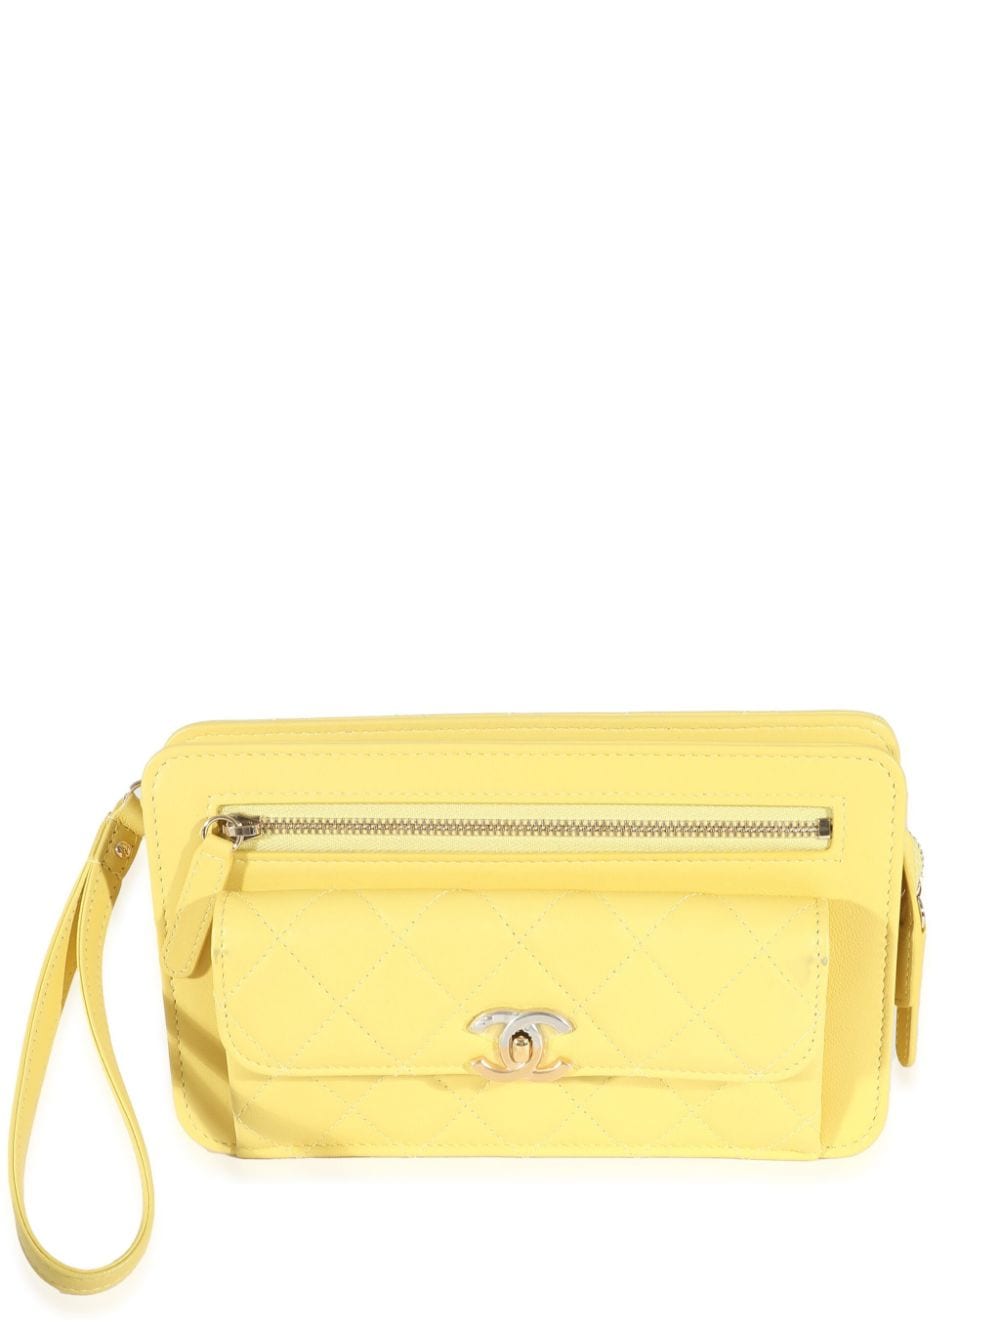 Pre-owned Chanel 2019 Diamond Quilted Clutch Bag In Yellow